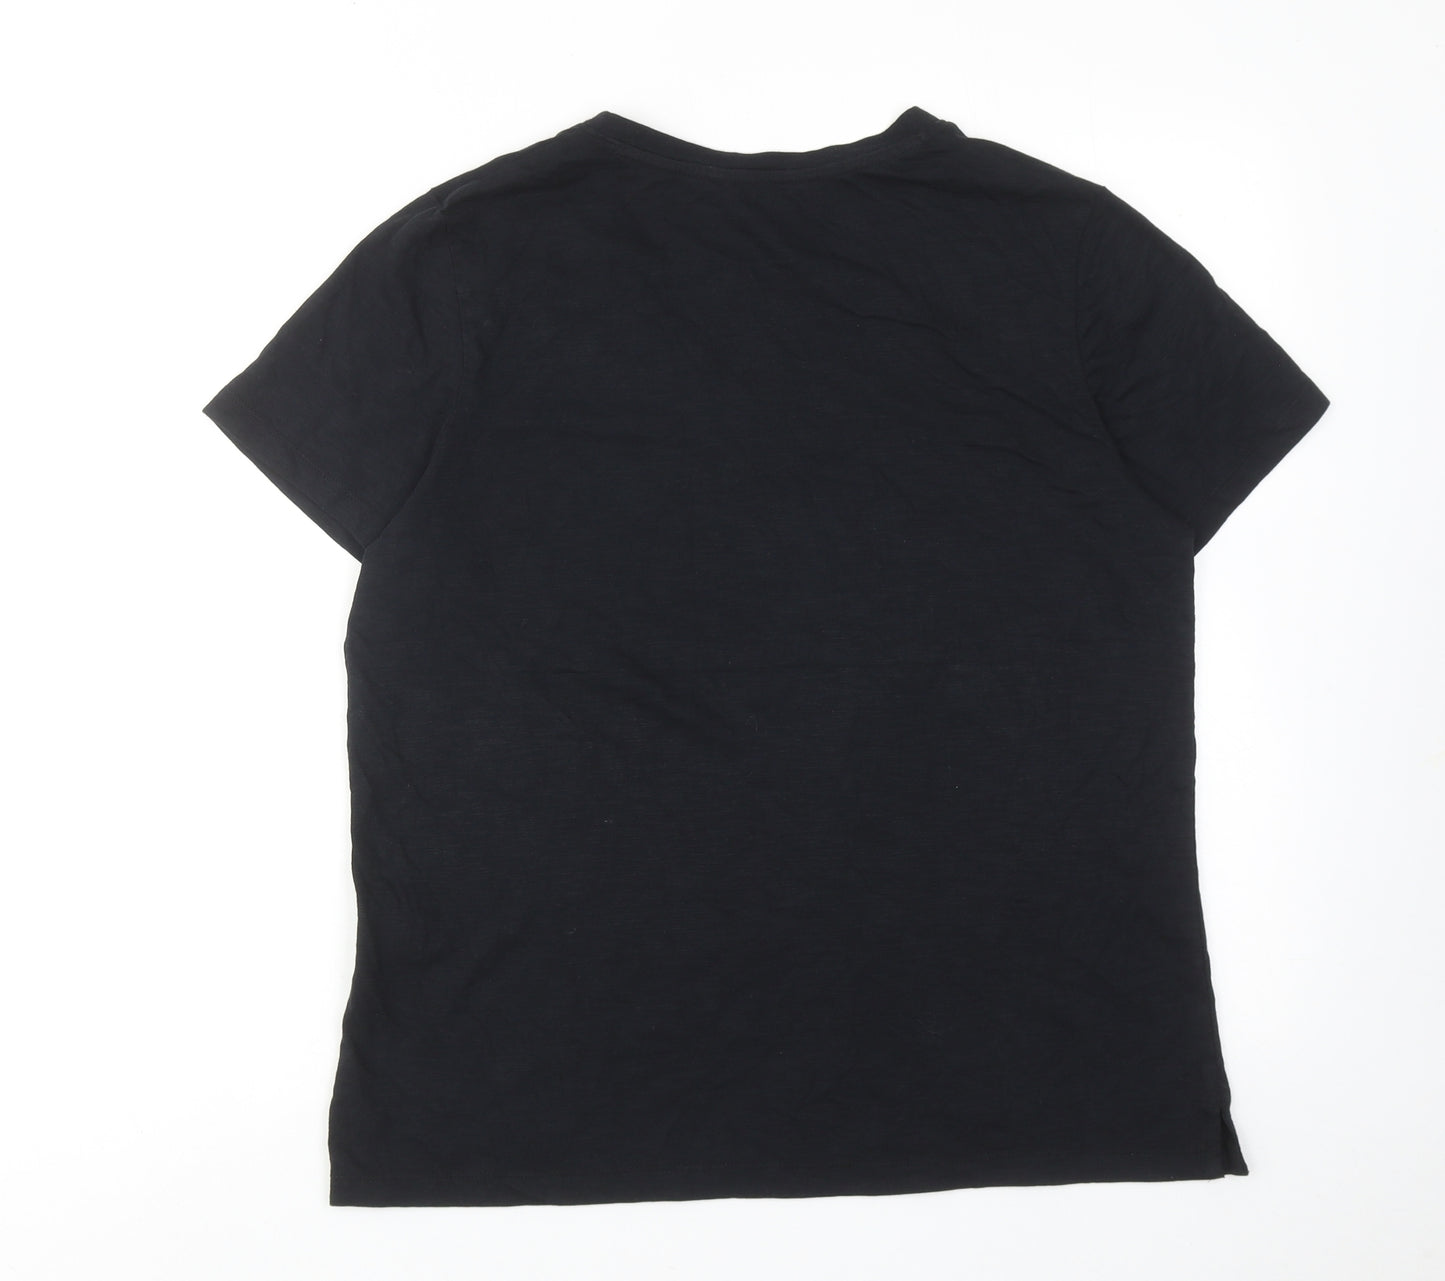 Marks and Spencer Womens Black Cotton Basic T-Shirt Size 14 Round Neck